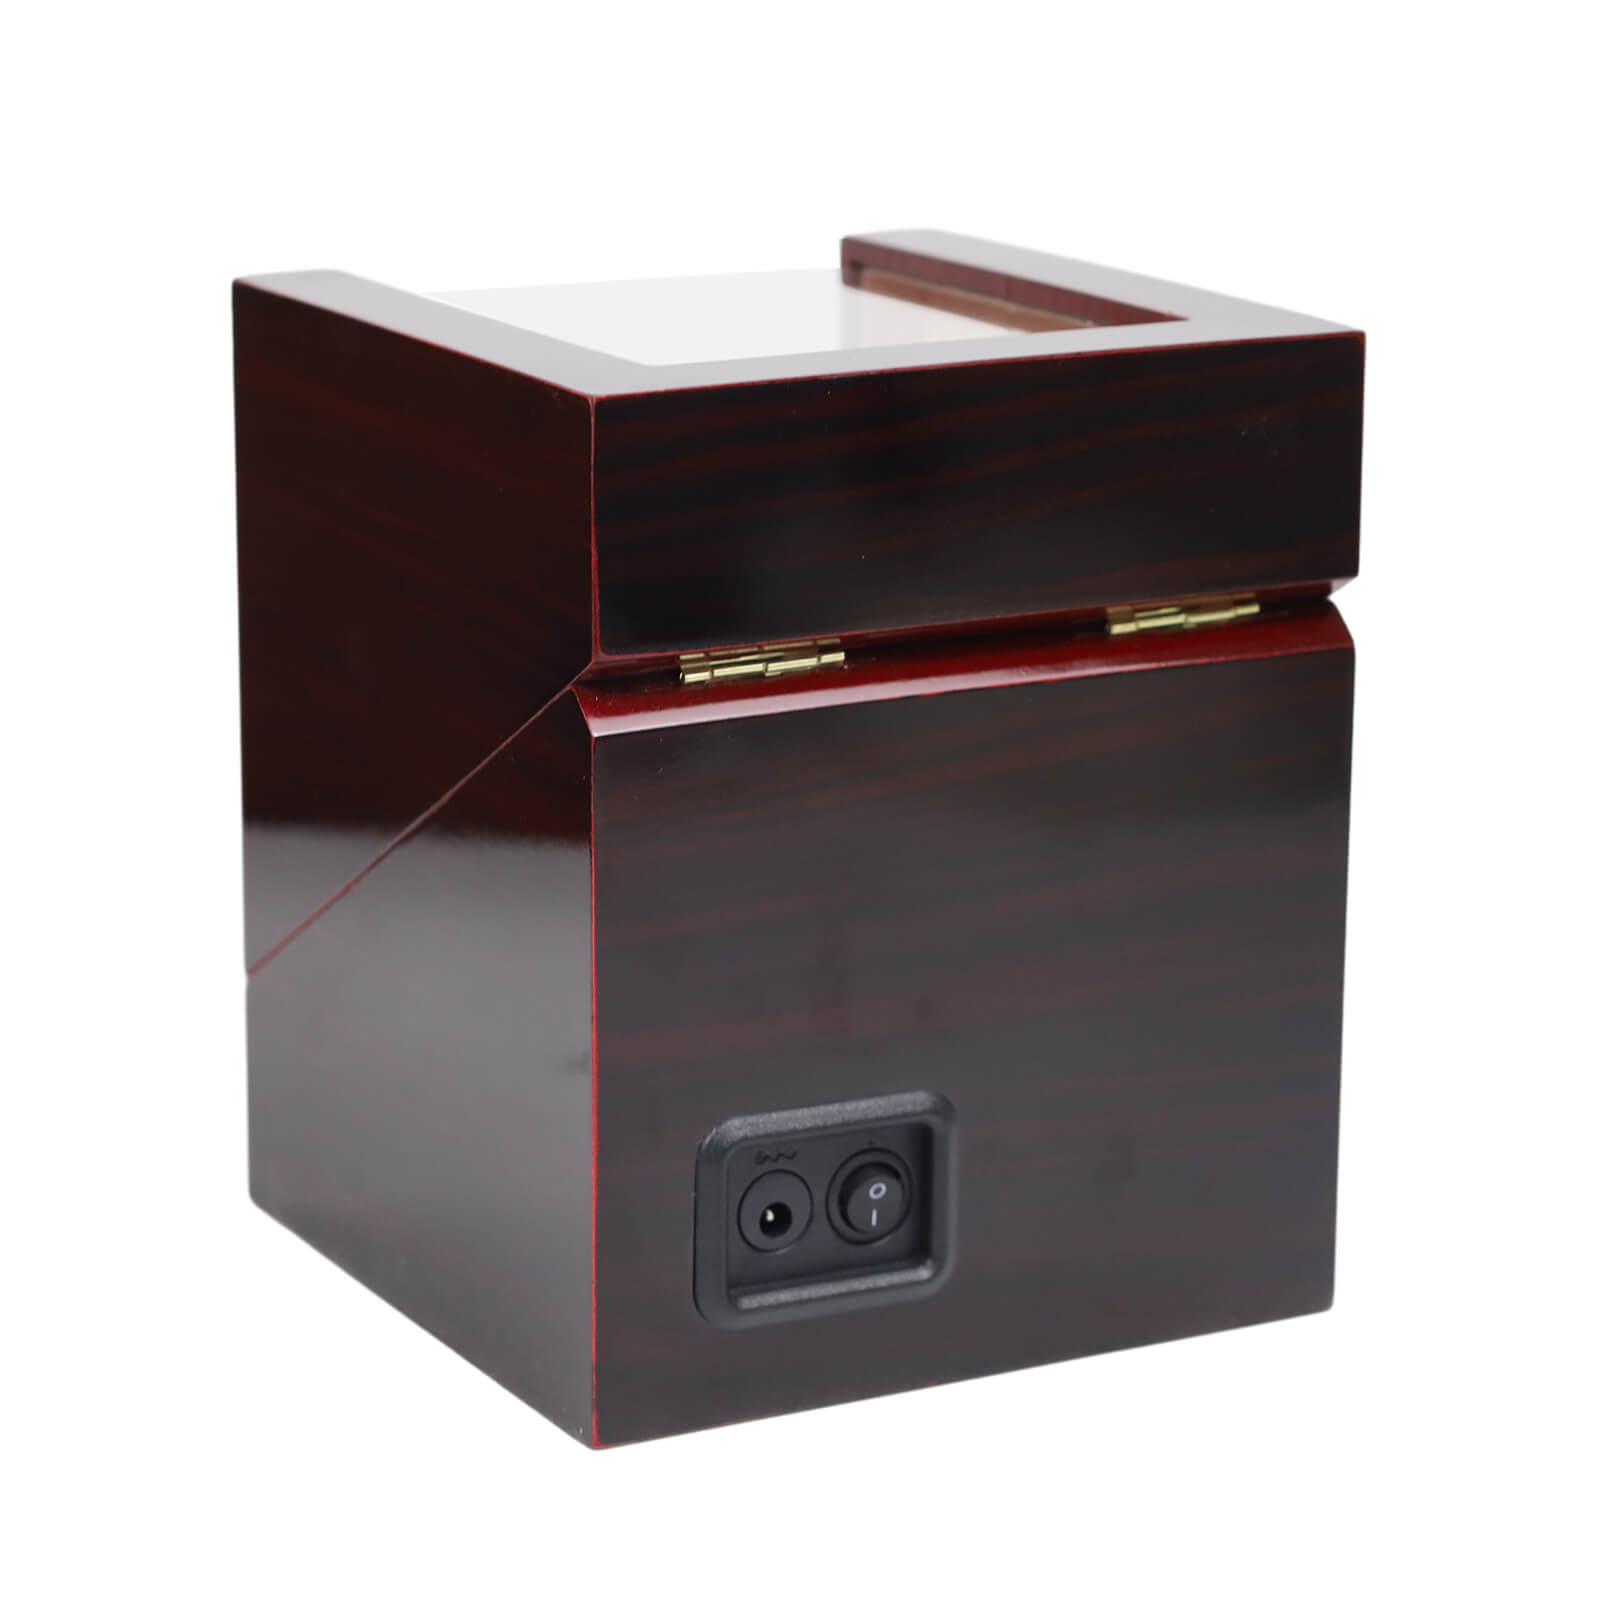 Double Watch Winder for Automatic Watches with Flexible Plush Pillow Super Quiet Motor- Ebony